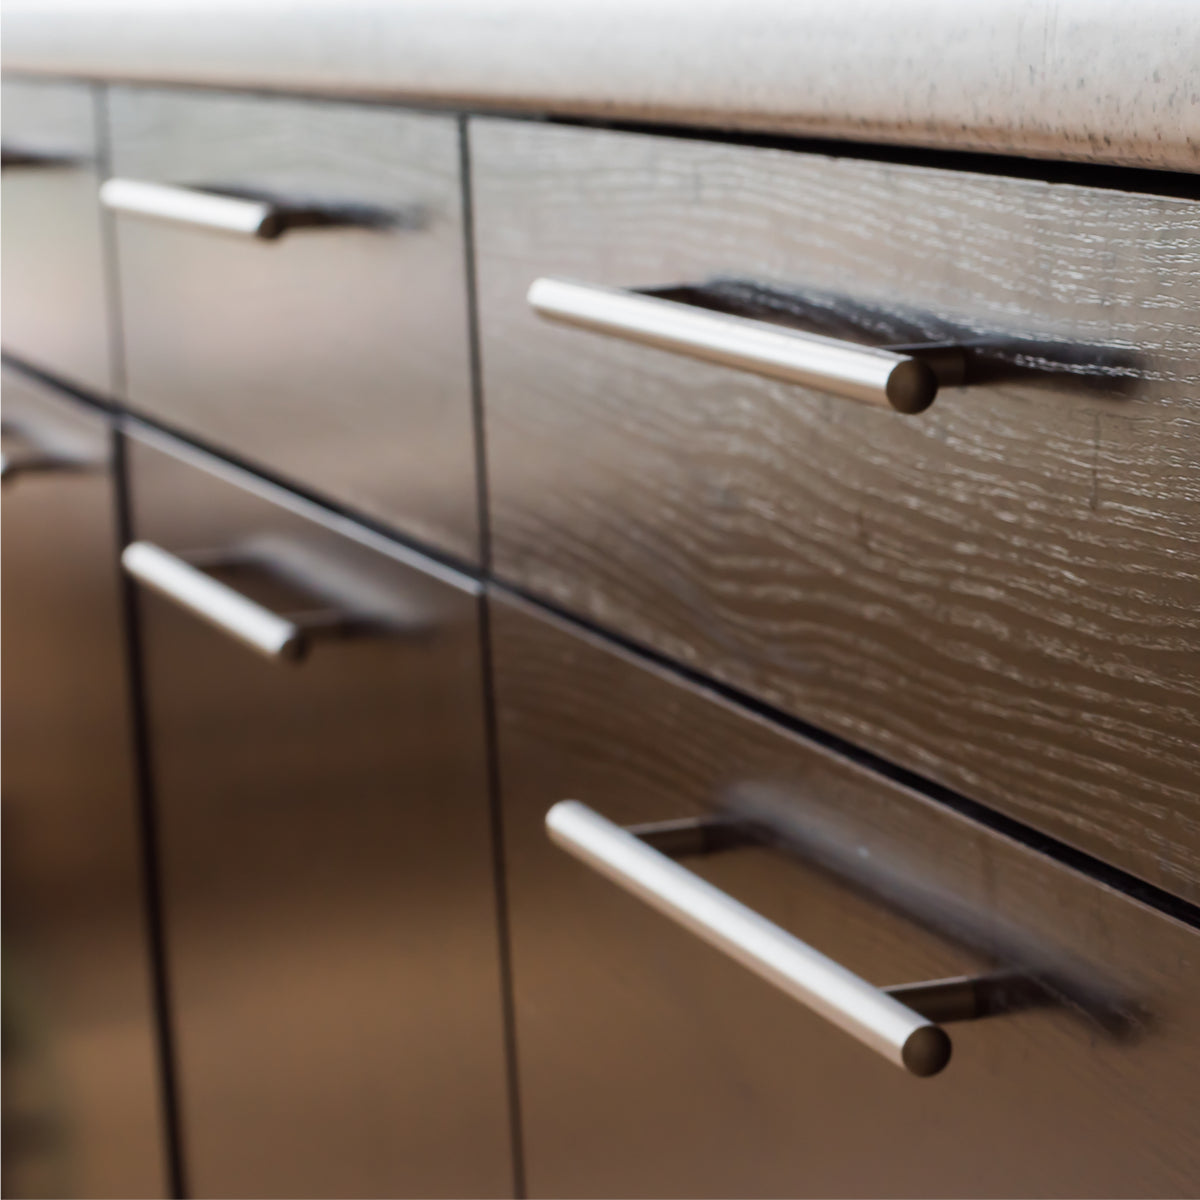 How To Choose The Best Size Pulls For Your Cabinets Drawers